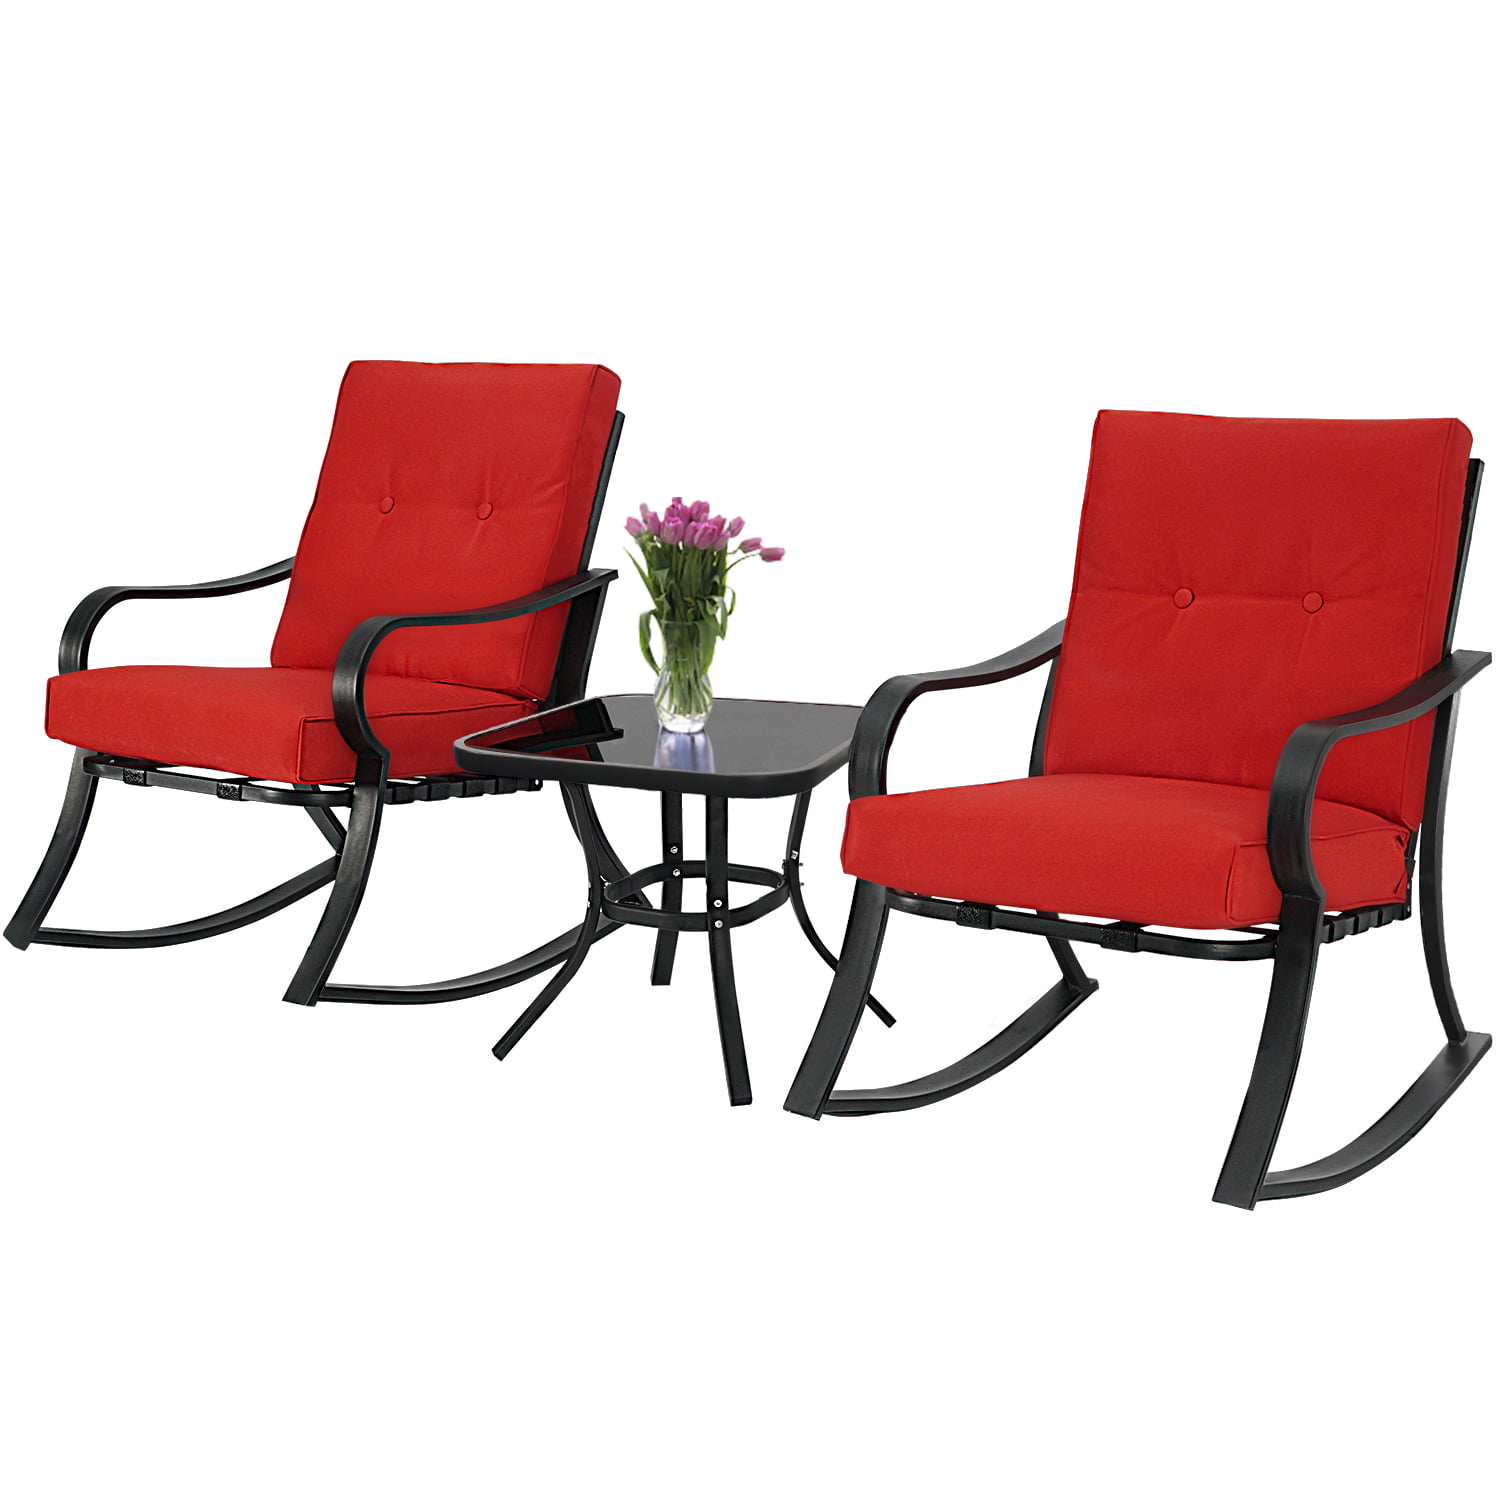 Rocking Chairs Bistro Set, Cushions For Outdoor Metal Rocking Chairs